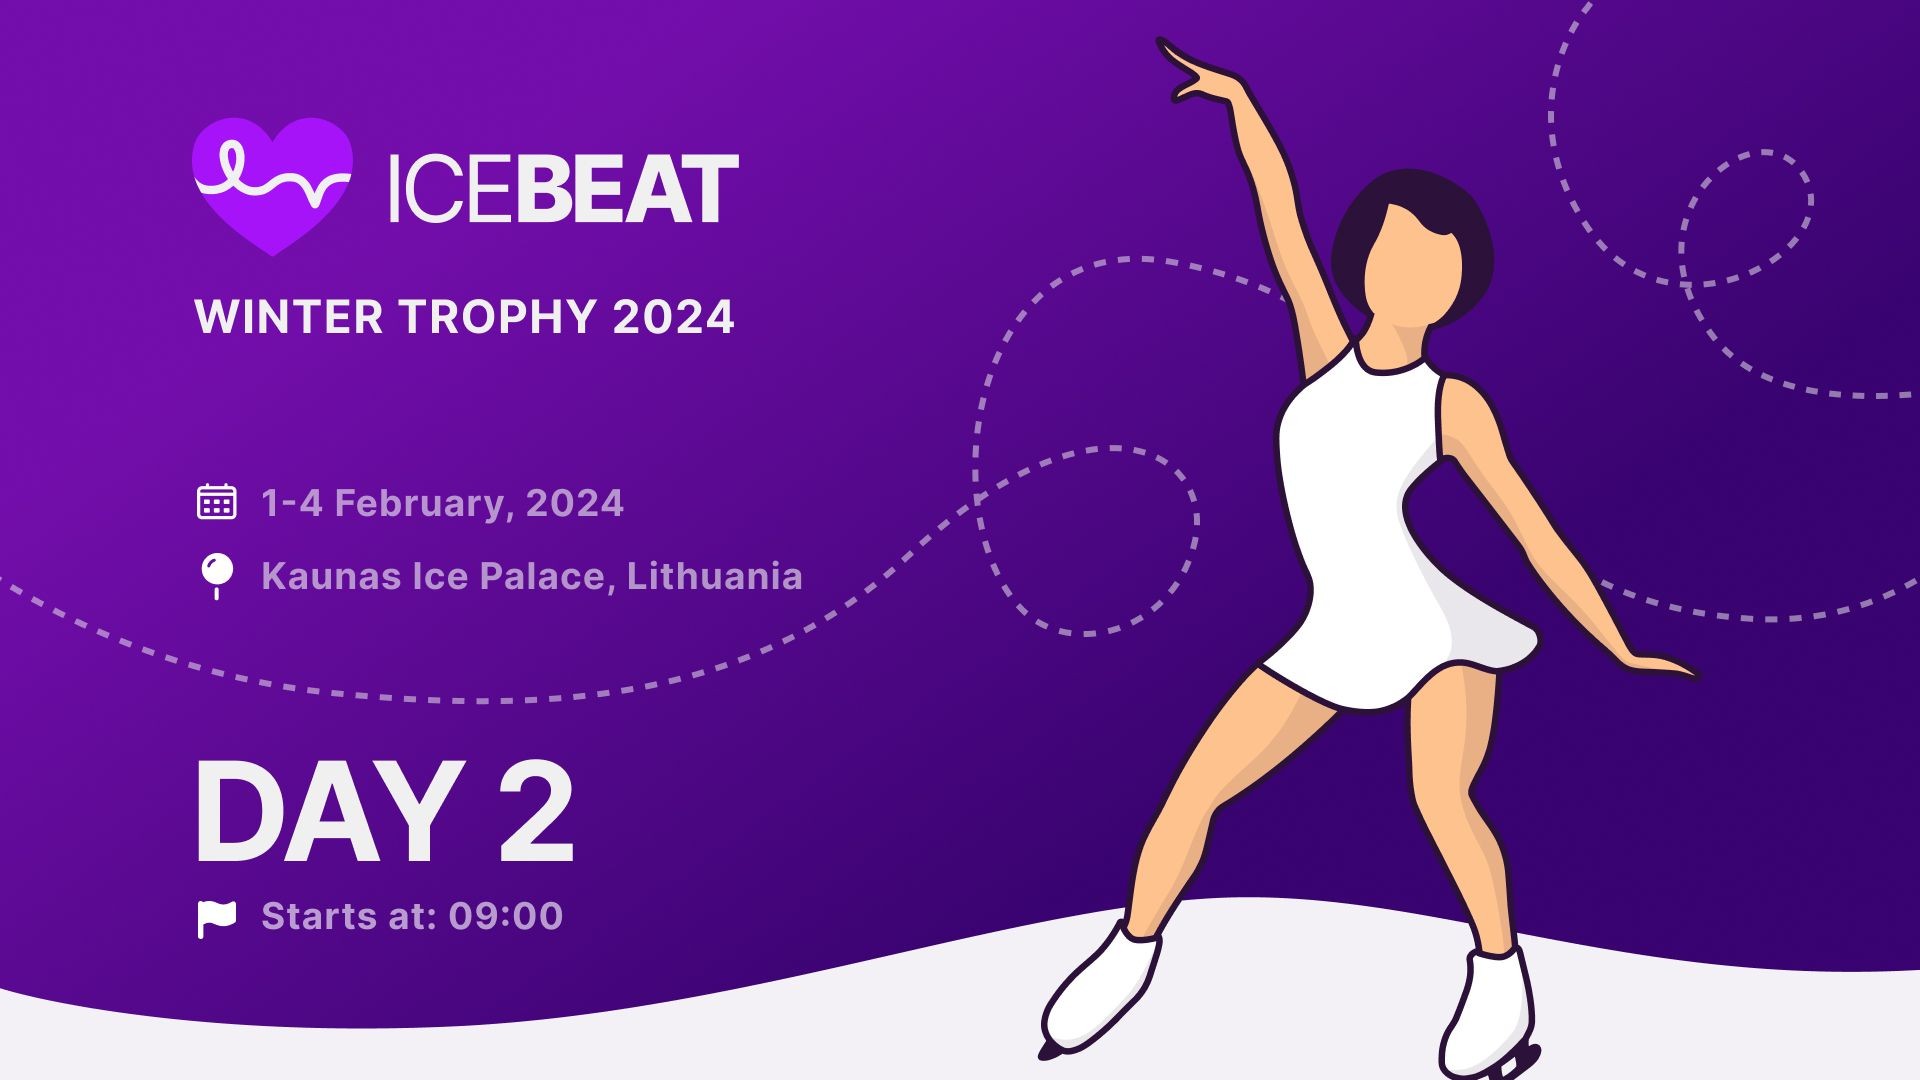 DAY 2 - ICEBEAT WINTER TROPHY 2024